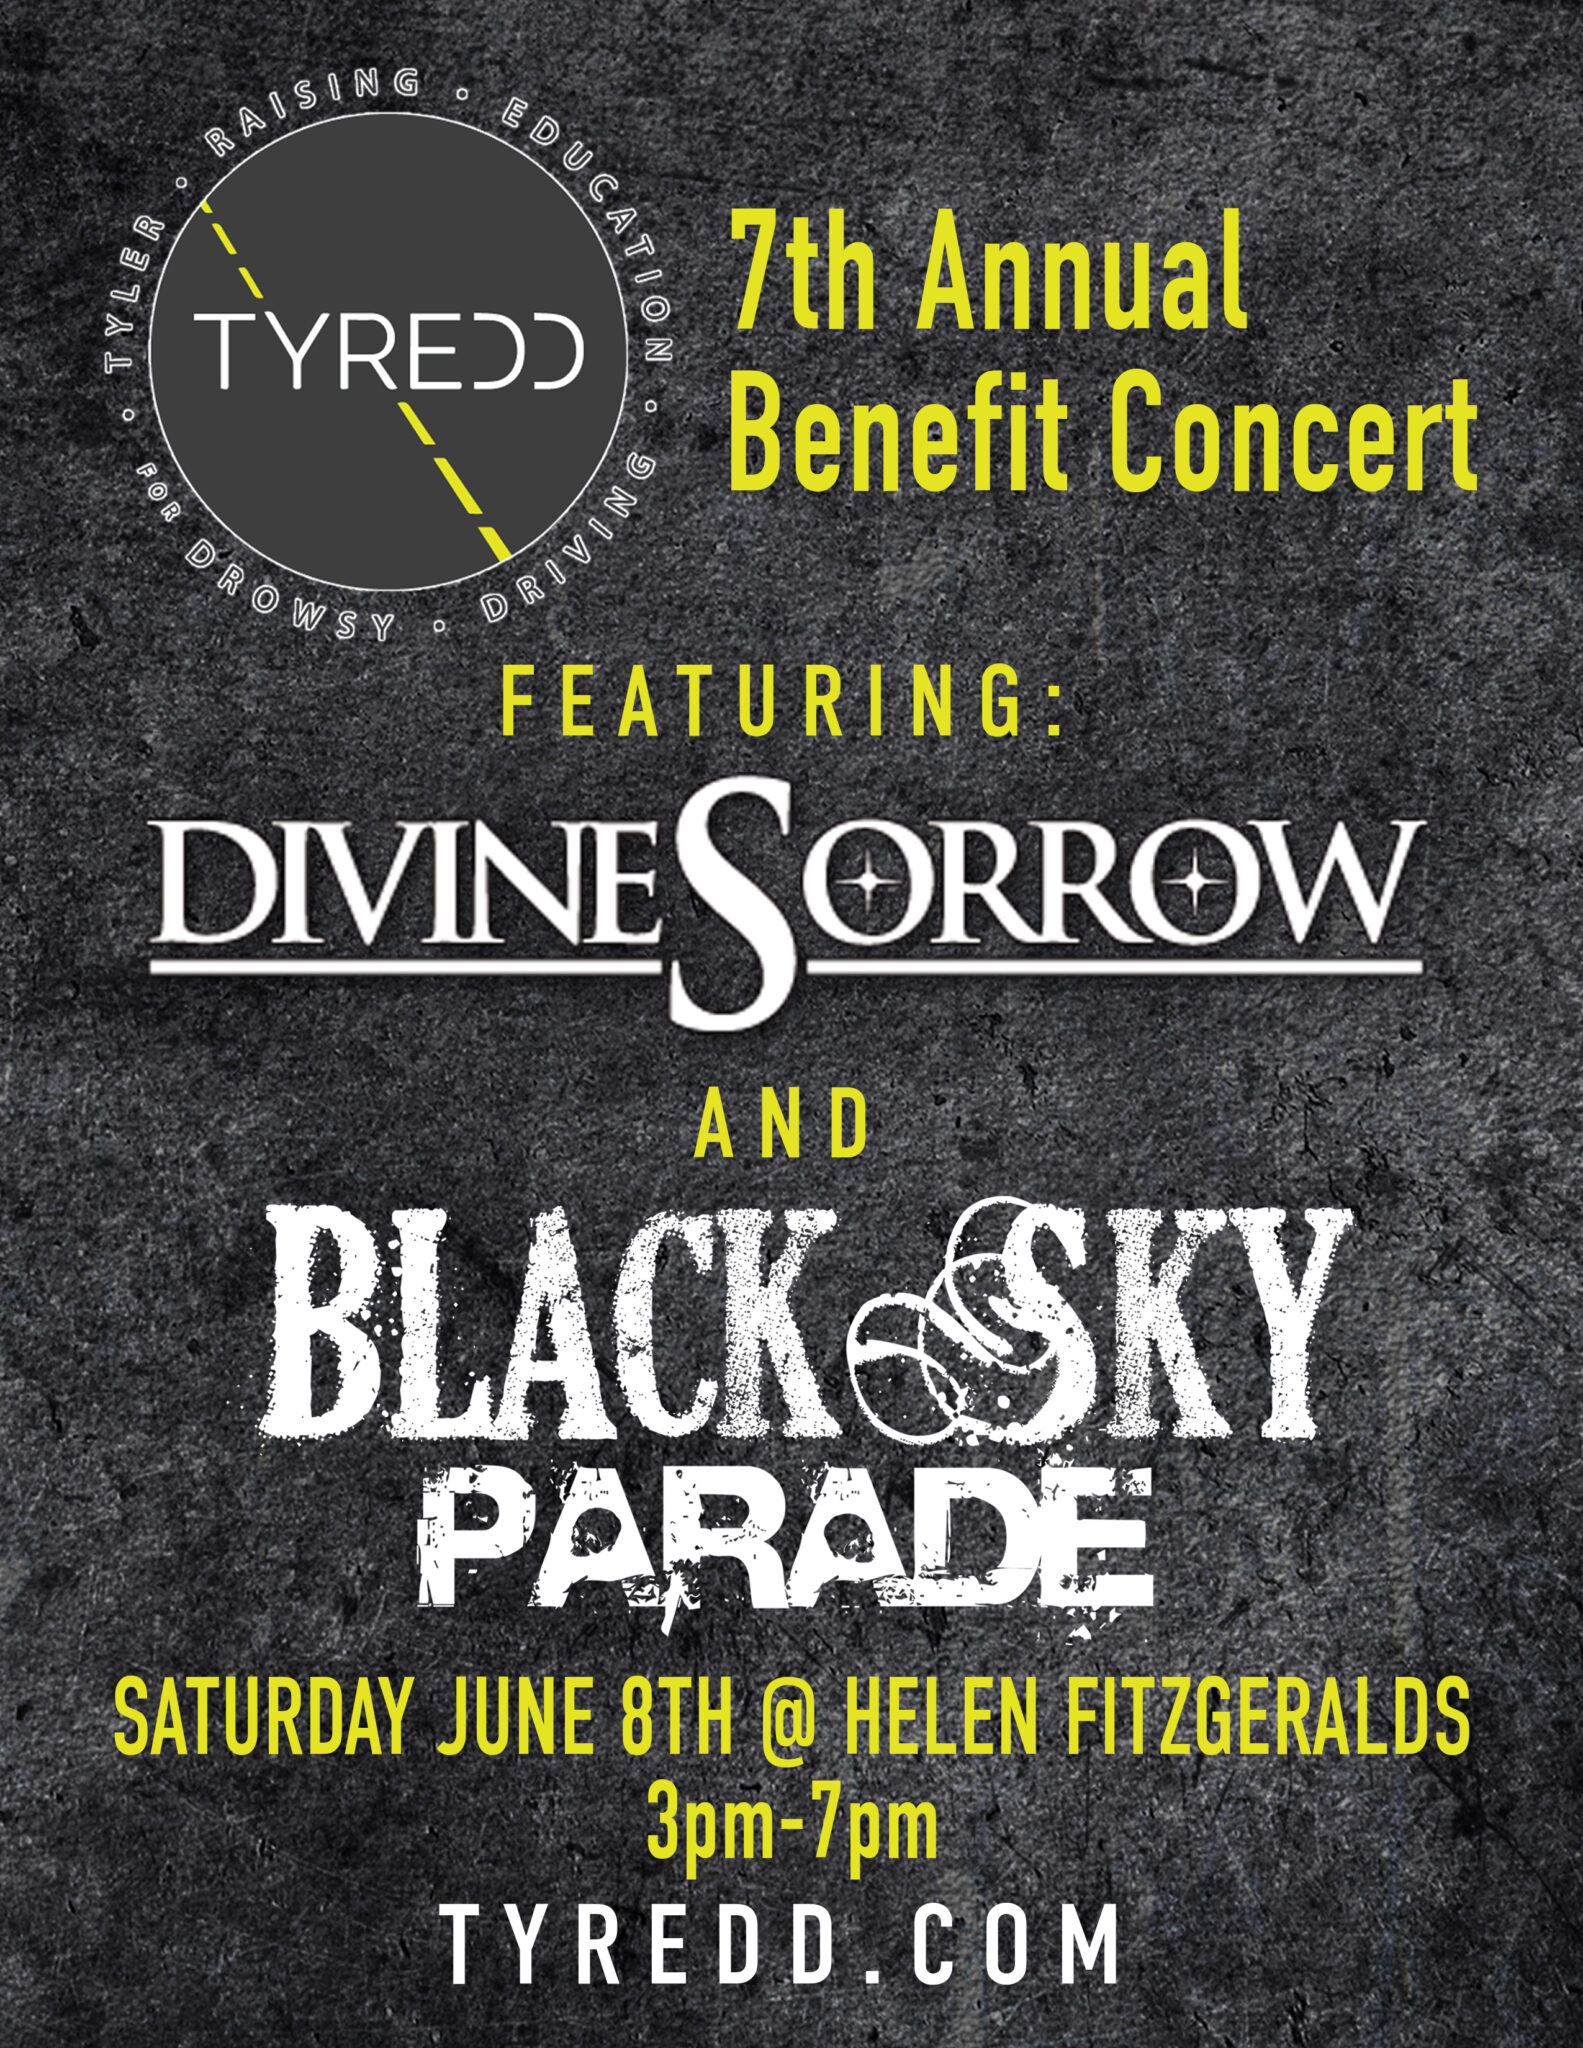 7th Annual Benefit Concert, June 8th, from 3-7pm at Helen Fitzgeralds. Featuring the bands Divine Sorrow and Black Sky Parade.